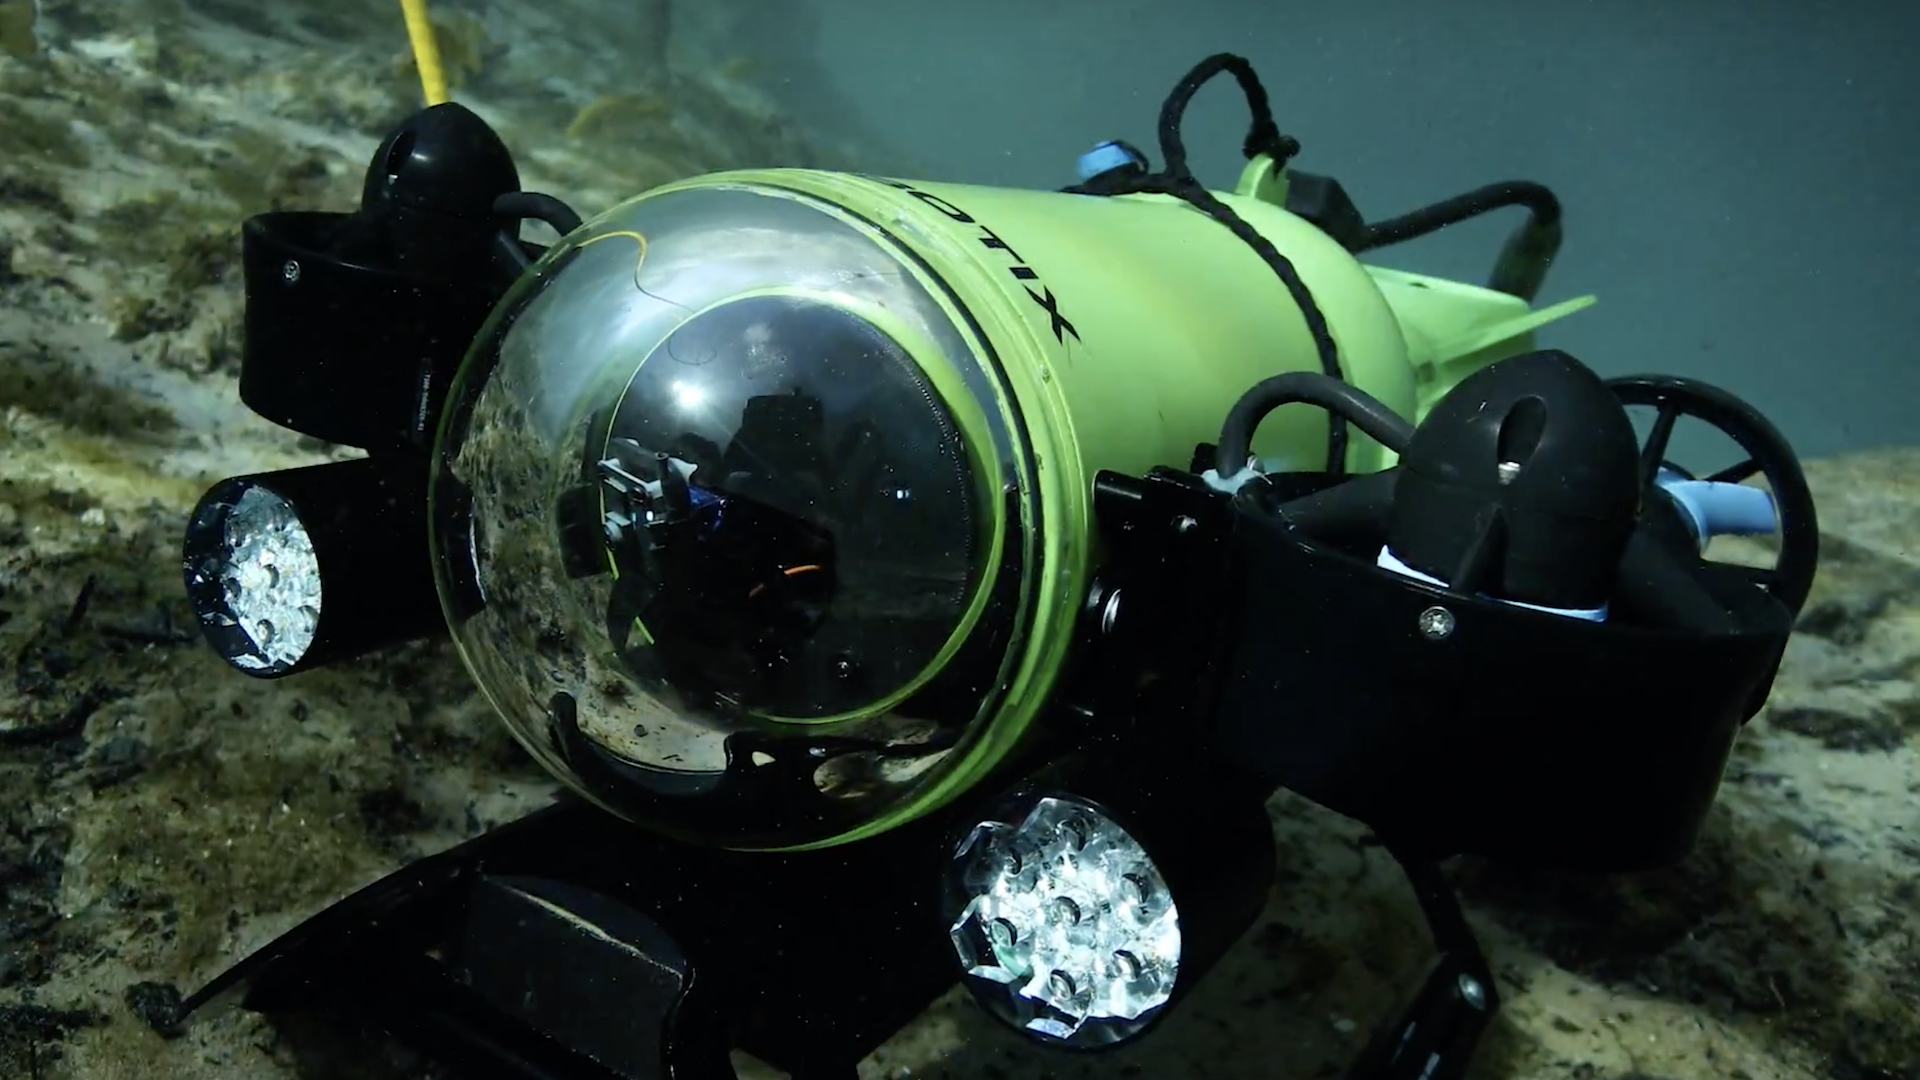 Underwater Drone Company Aquabotix Granted Explosives License by ATF